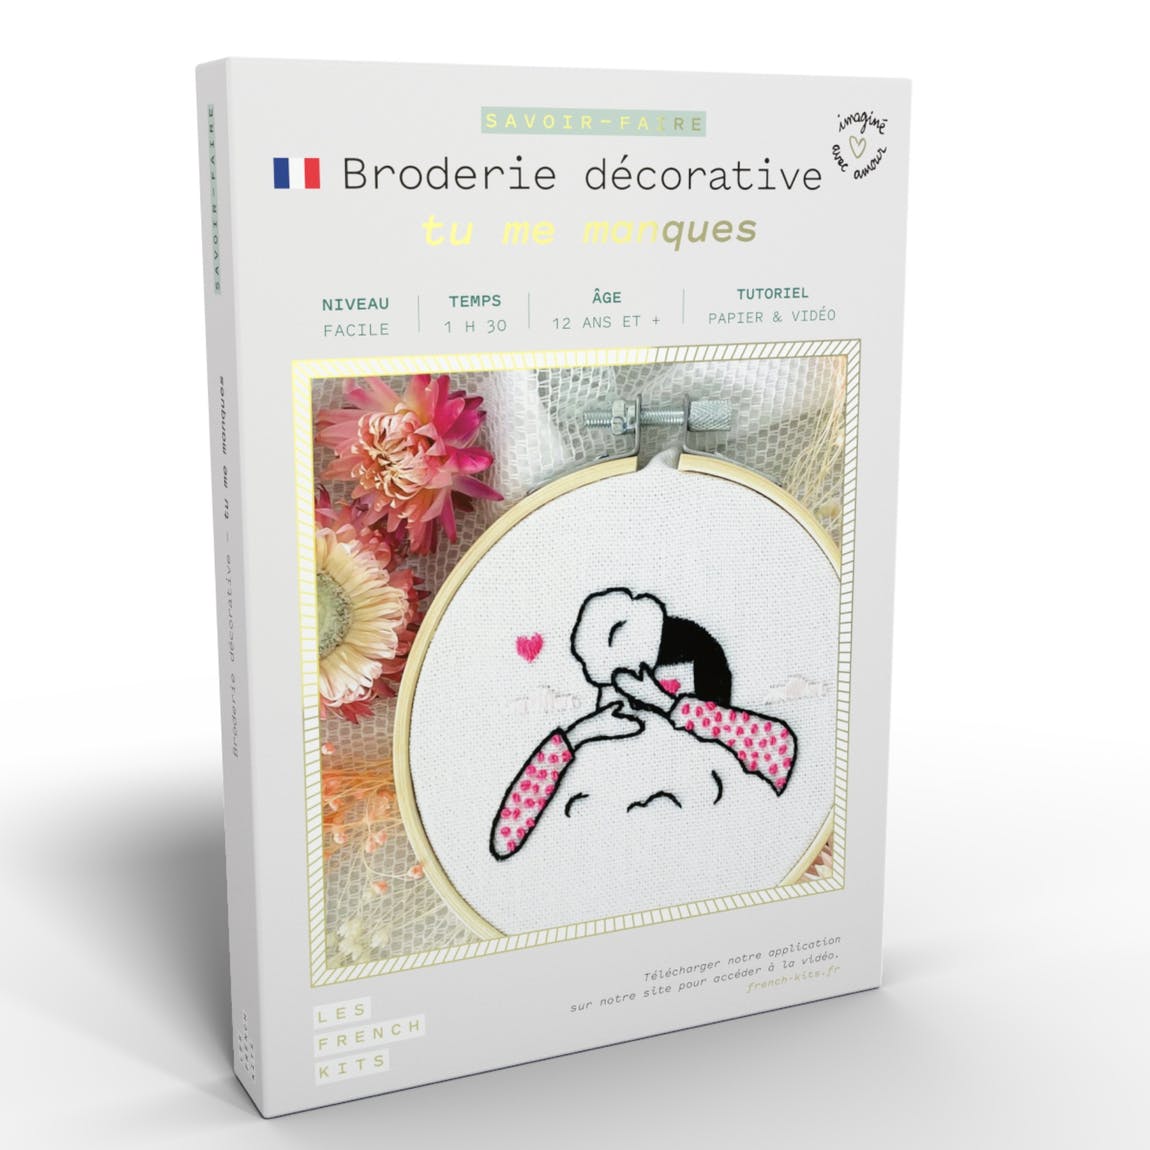 FRENCH KITS - BRODERIE DÉCORATIVE - PASSION & COUPLE